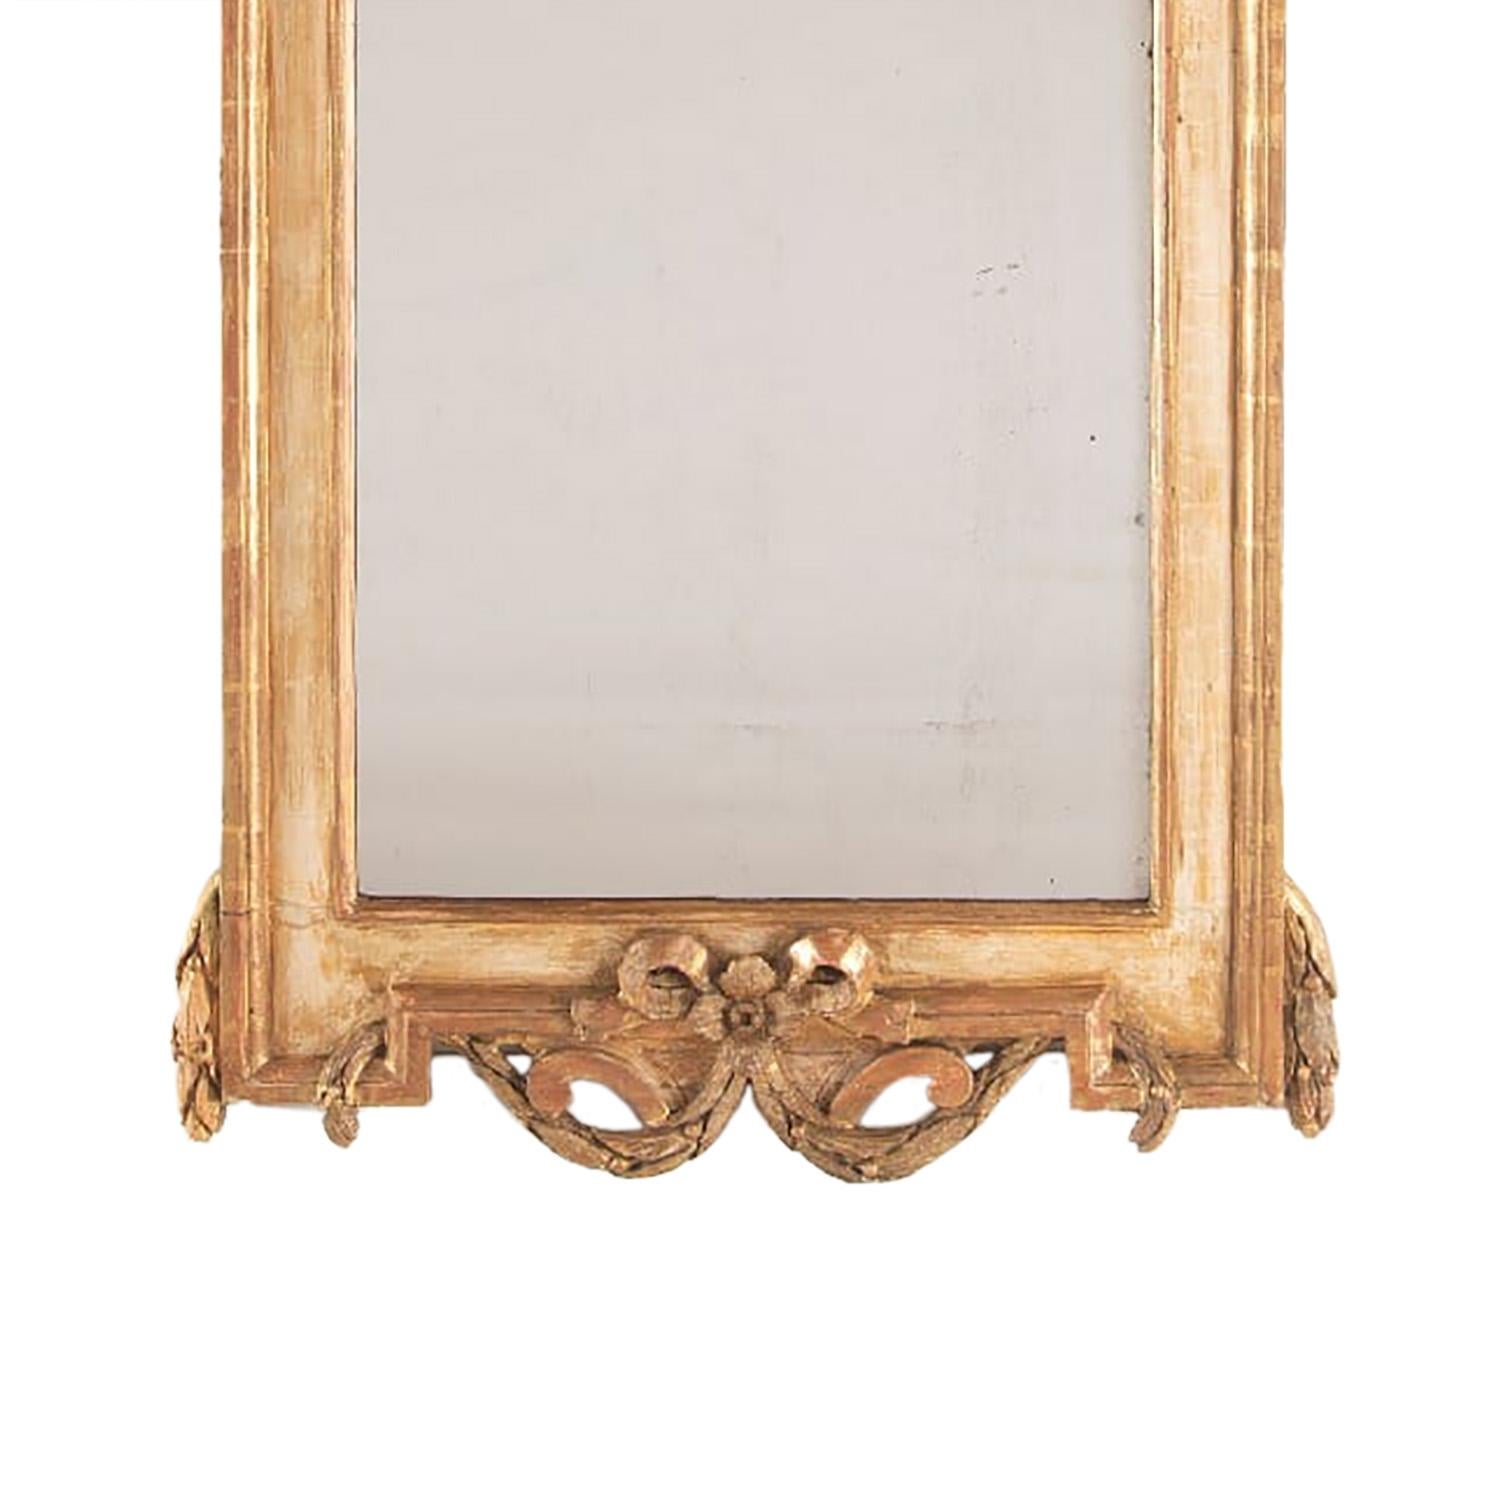 18th century Stockholm work Swedish mirror washed to its original gilding. This piece is a good size, and manufactured in 1780.